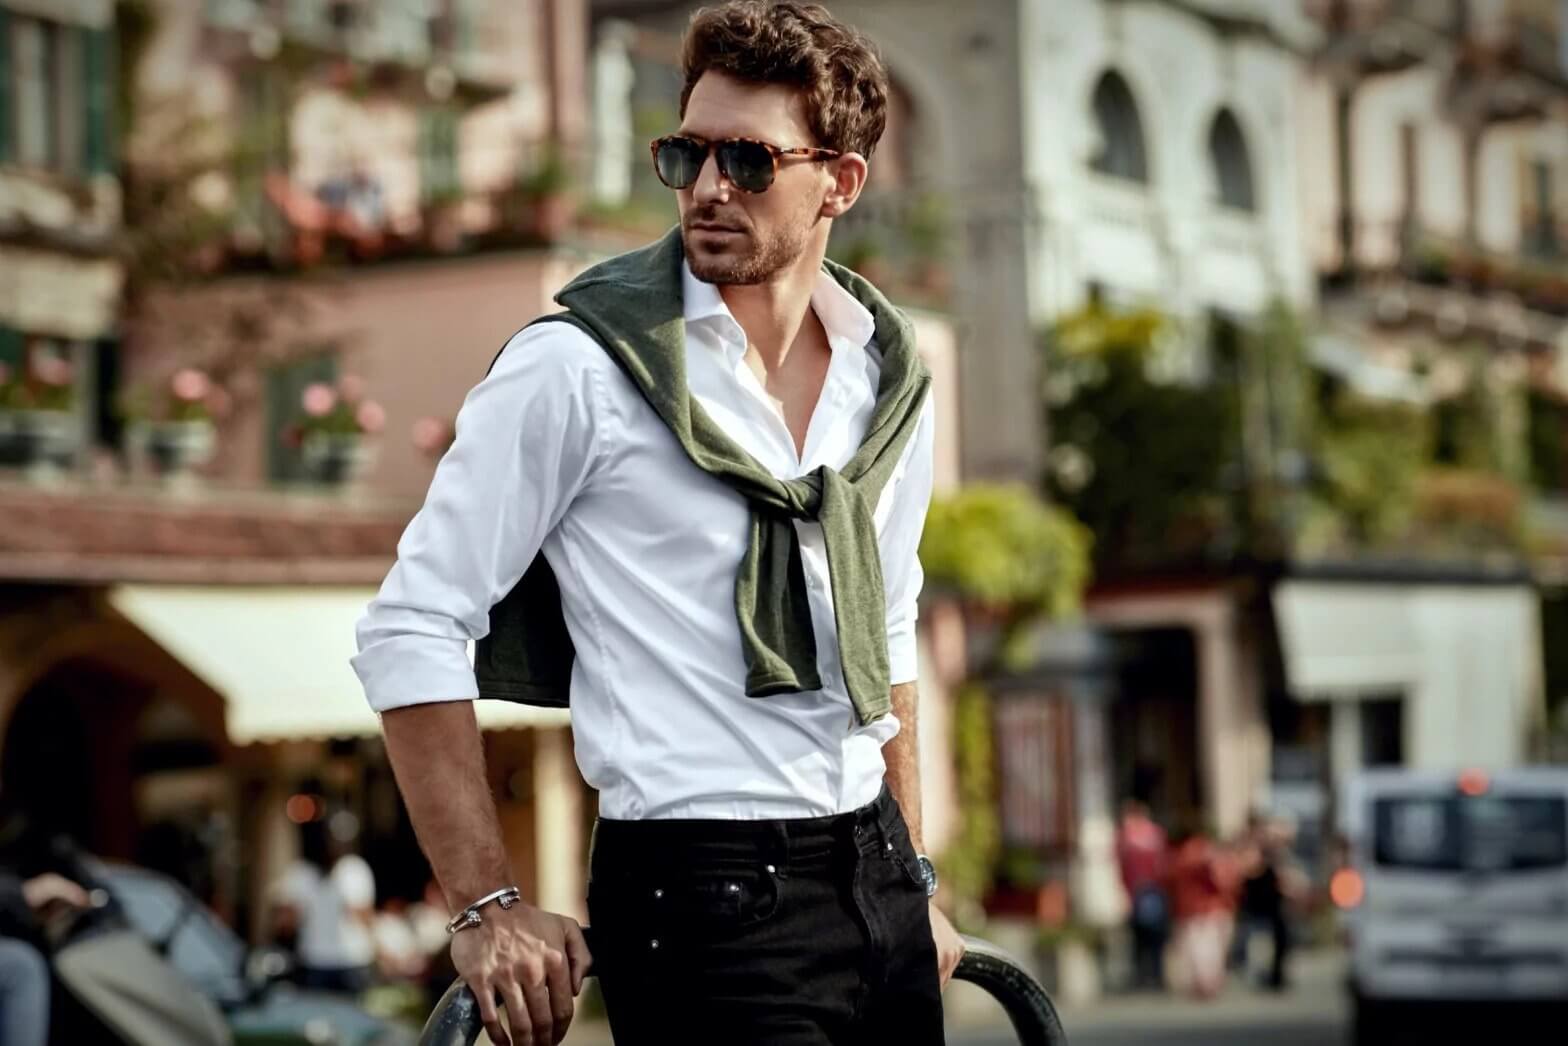 style-homme-chemise-blance